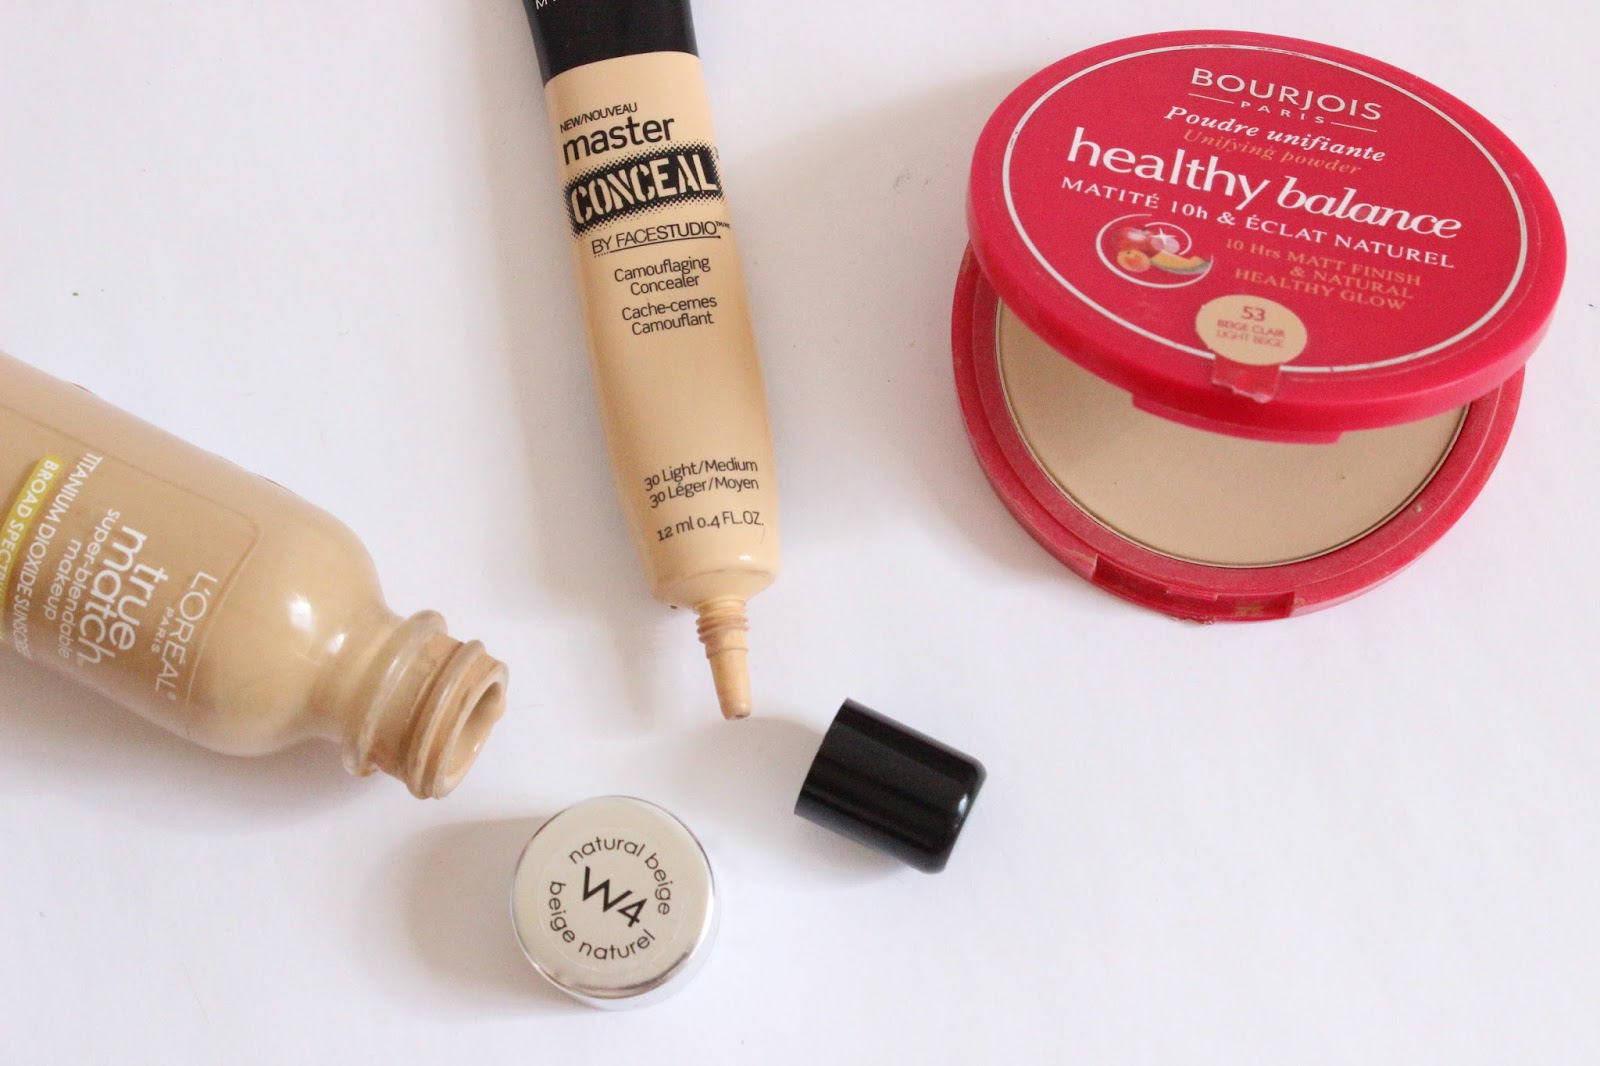 The Drugstore Base | L'Oreal True Match Foundation, Maybelline Master Conceal, Bourjois Healthy Balance Powder